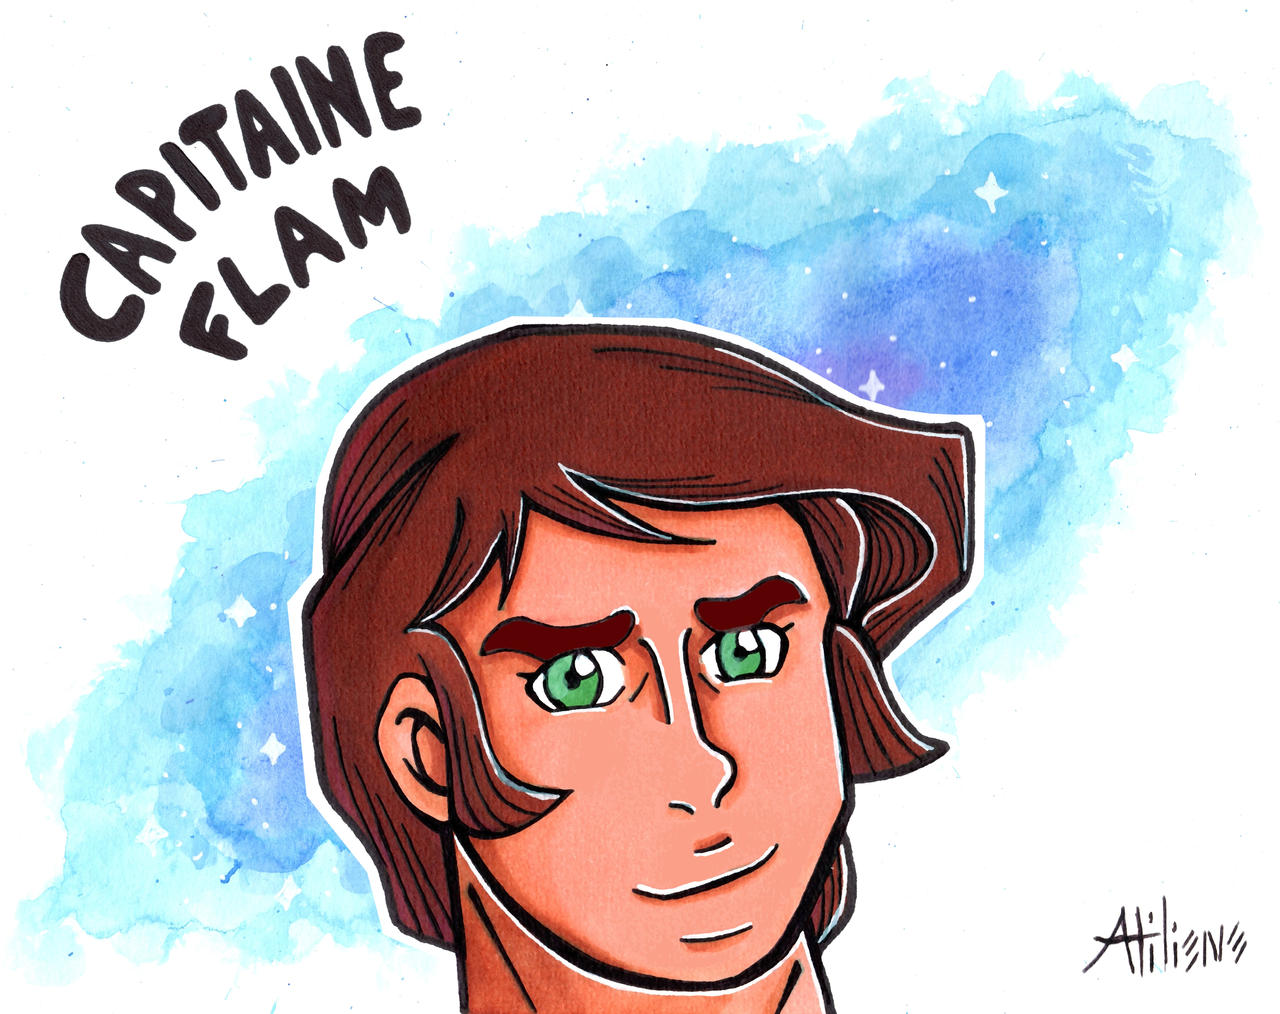 Capitaine Flam a.k.a Captain Future by Atiliene on DeviantArt